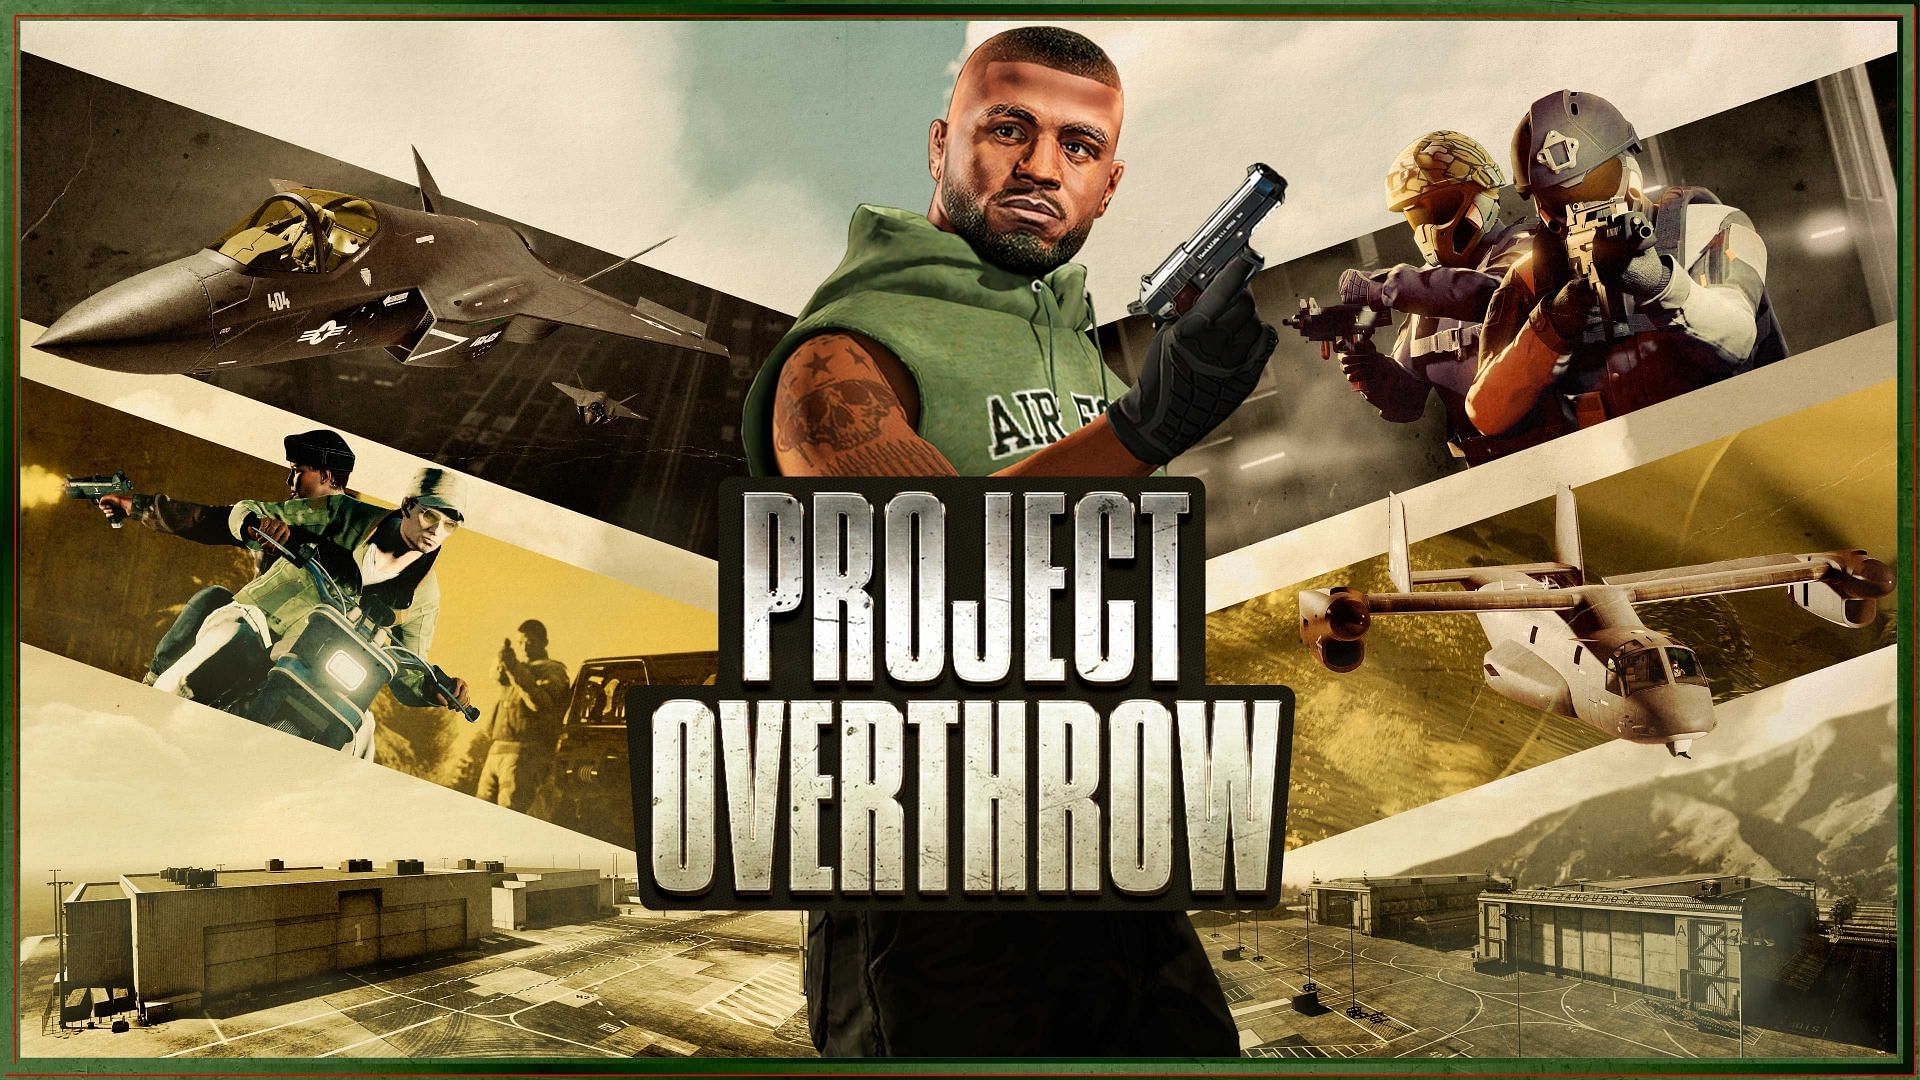 Project Overthrow missions can be unlocked by purchasing the Avenger